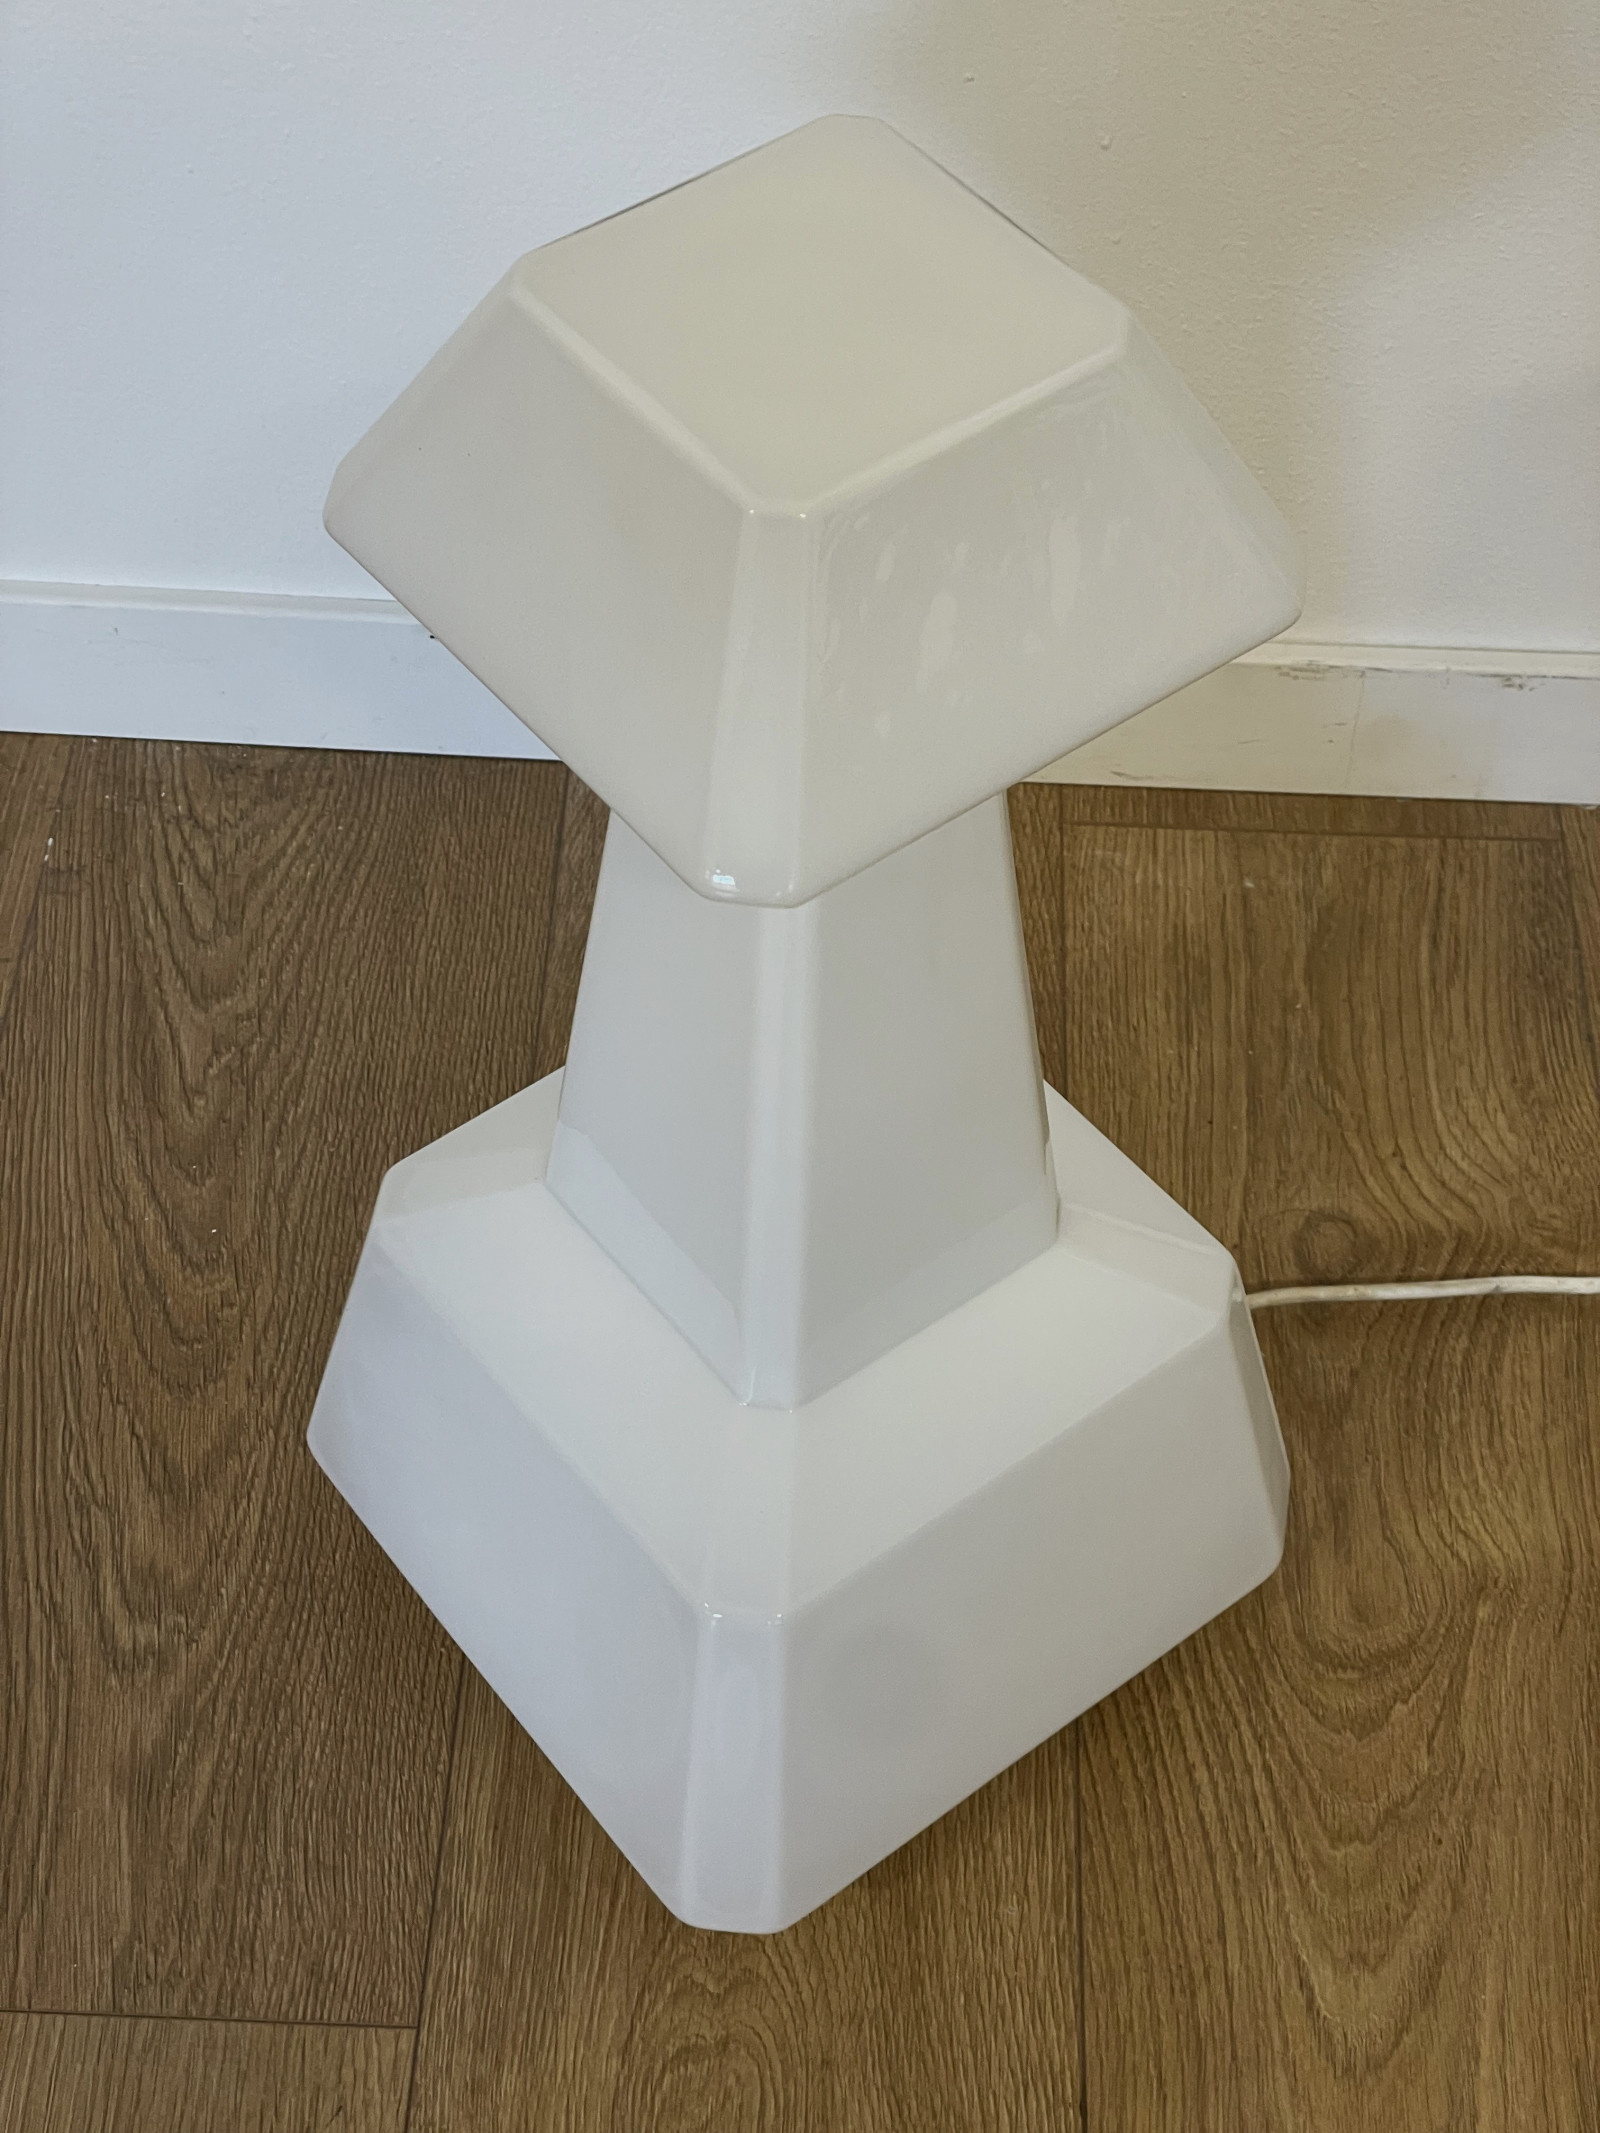 Rare Lamp by Toni Zuccheri for VeArt